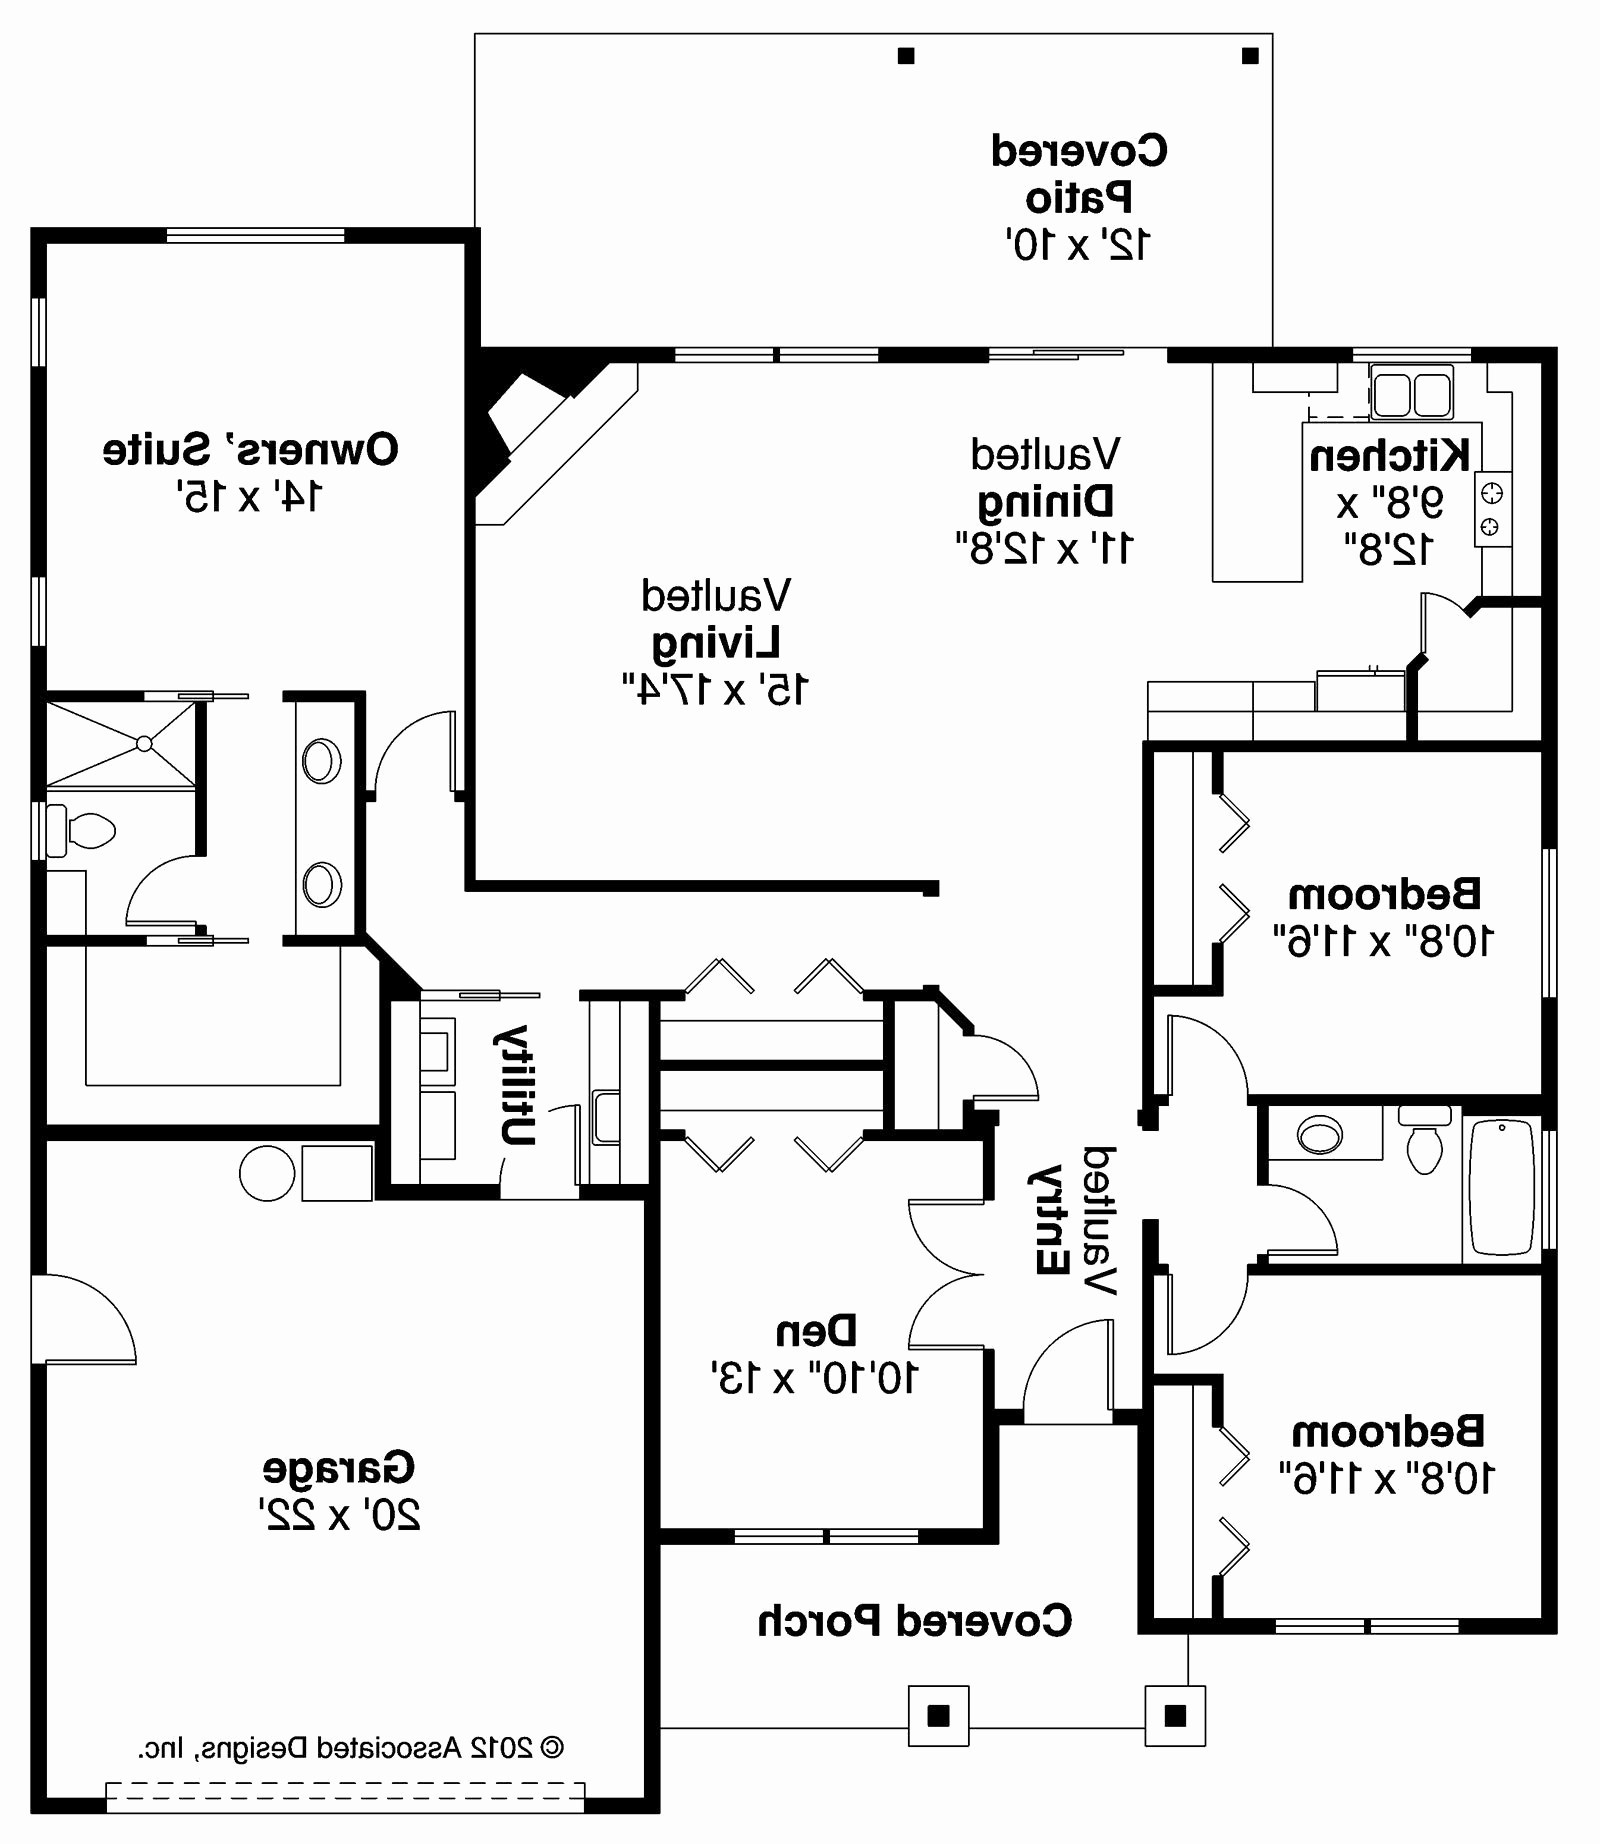 House Wiring Diagram Electrical Floor Plan 2004 2010 Bmw X3 E83 3 0d M57 Engine Wiring